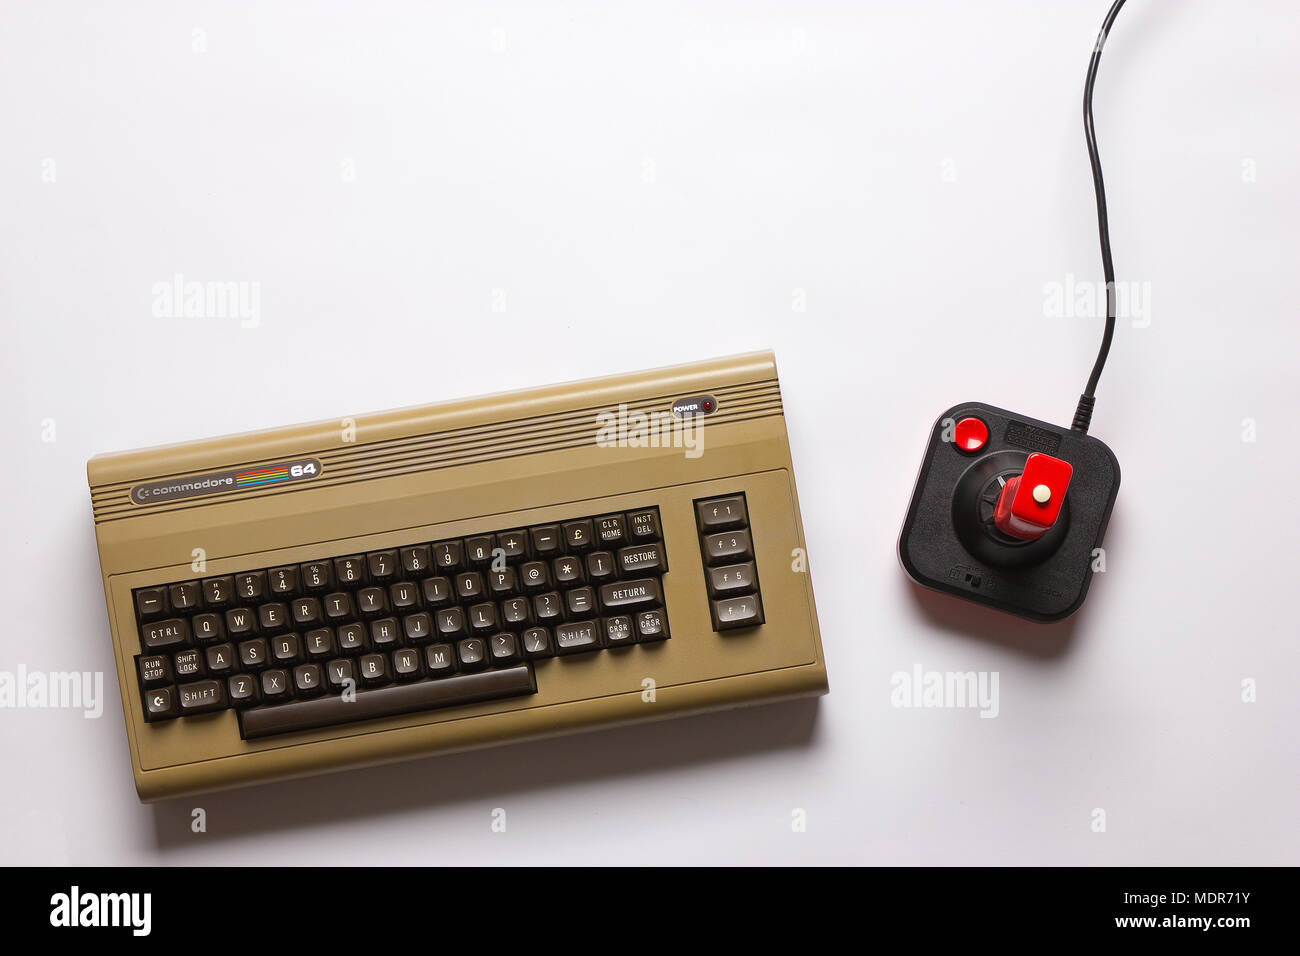 Commodore 64 computer, top view, on white background Stock Photo